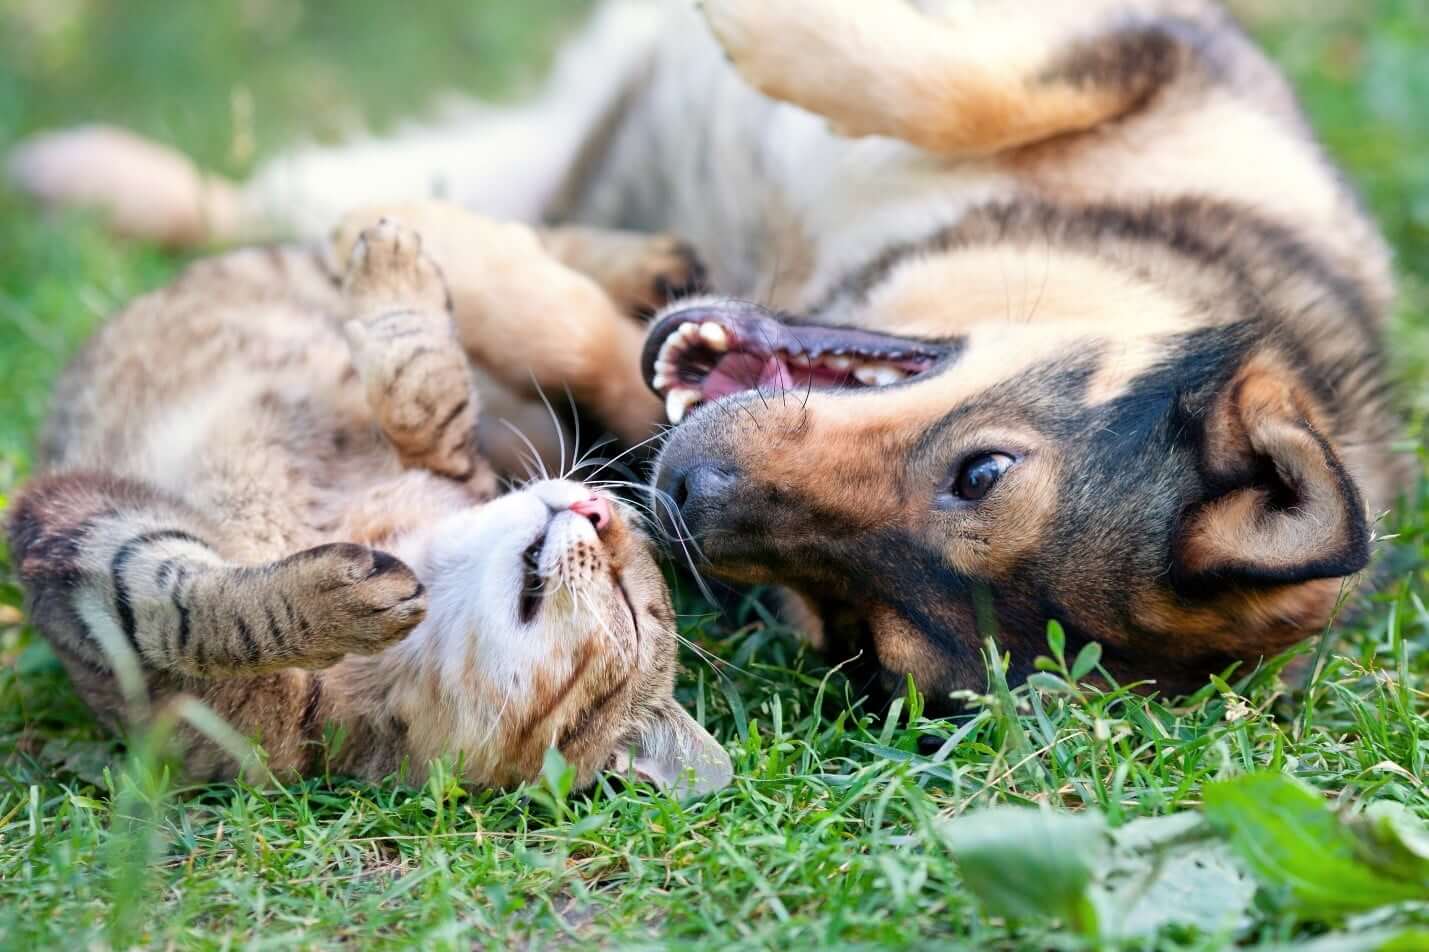 cat and dog playing in spring grass, healthy and smiling